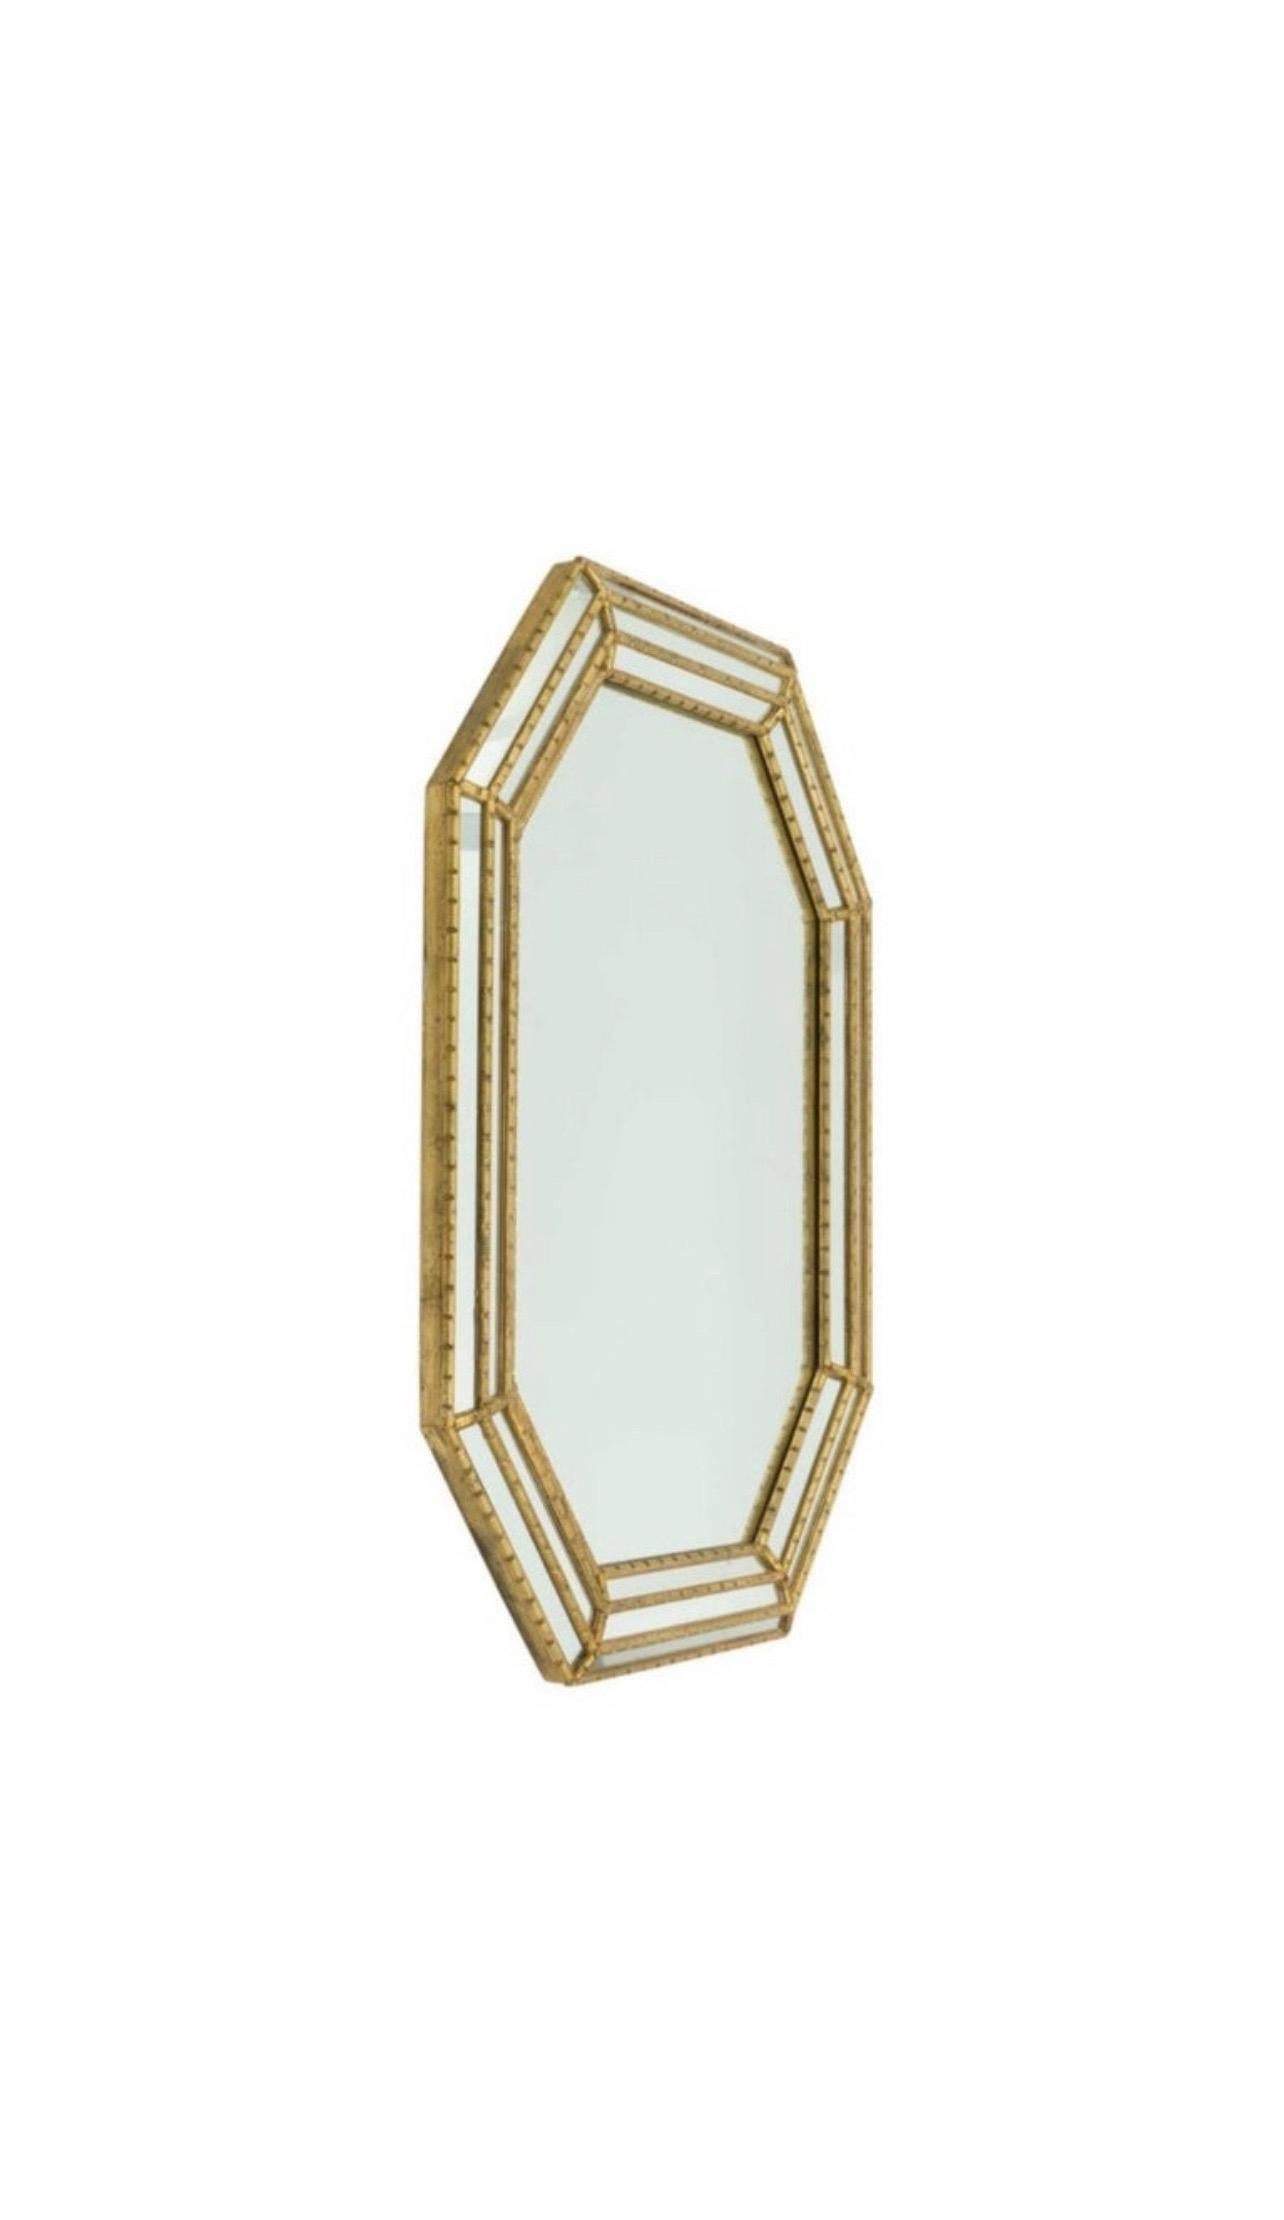 Gilt octagonal framed mirror by Labarge with a faux bamboo style notched frame and inset mirrored panels. 

USA, circa 1980.

Dimensions: 42.25” H x 31.25” W x 2.5” D

